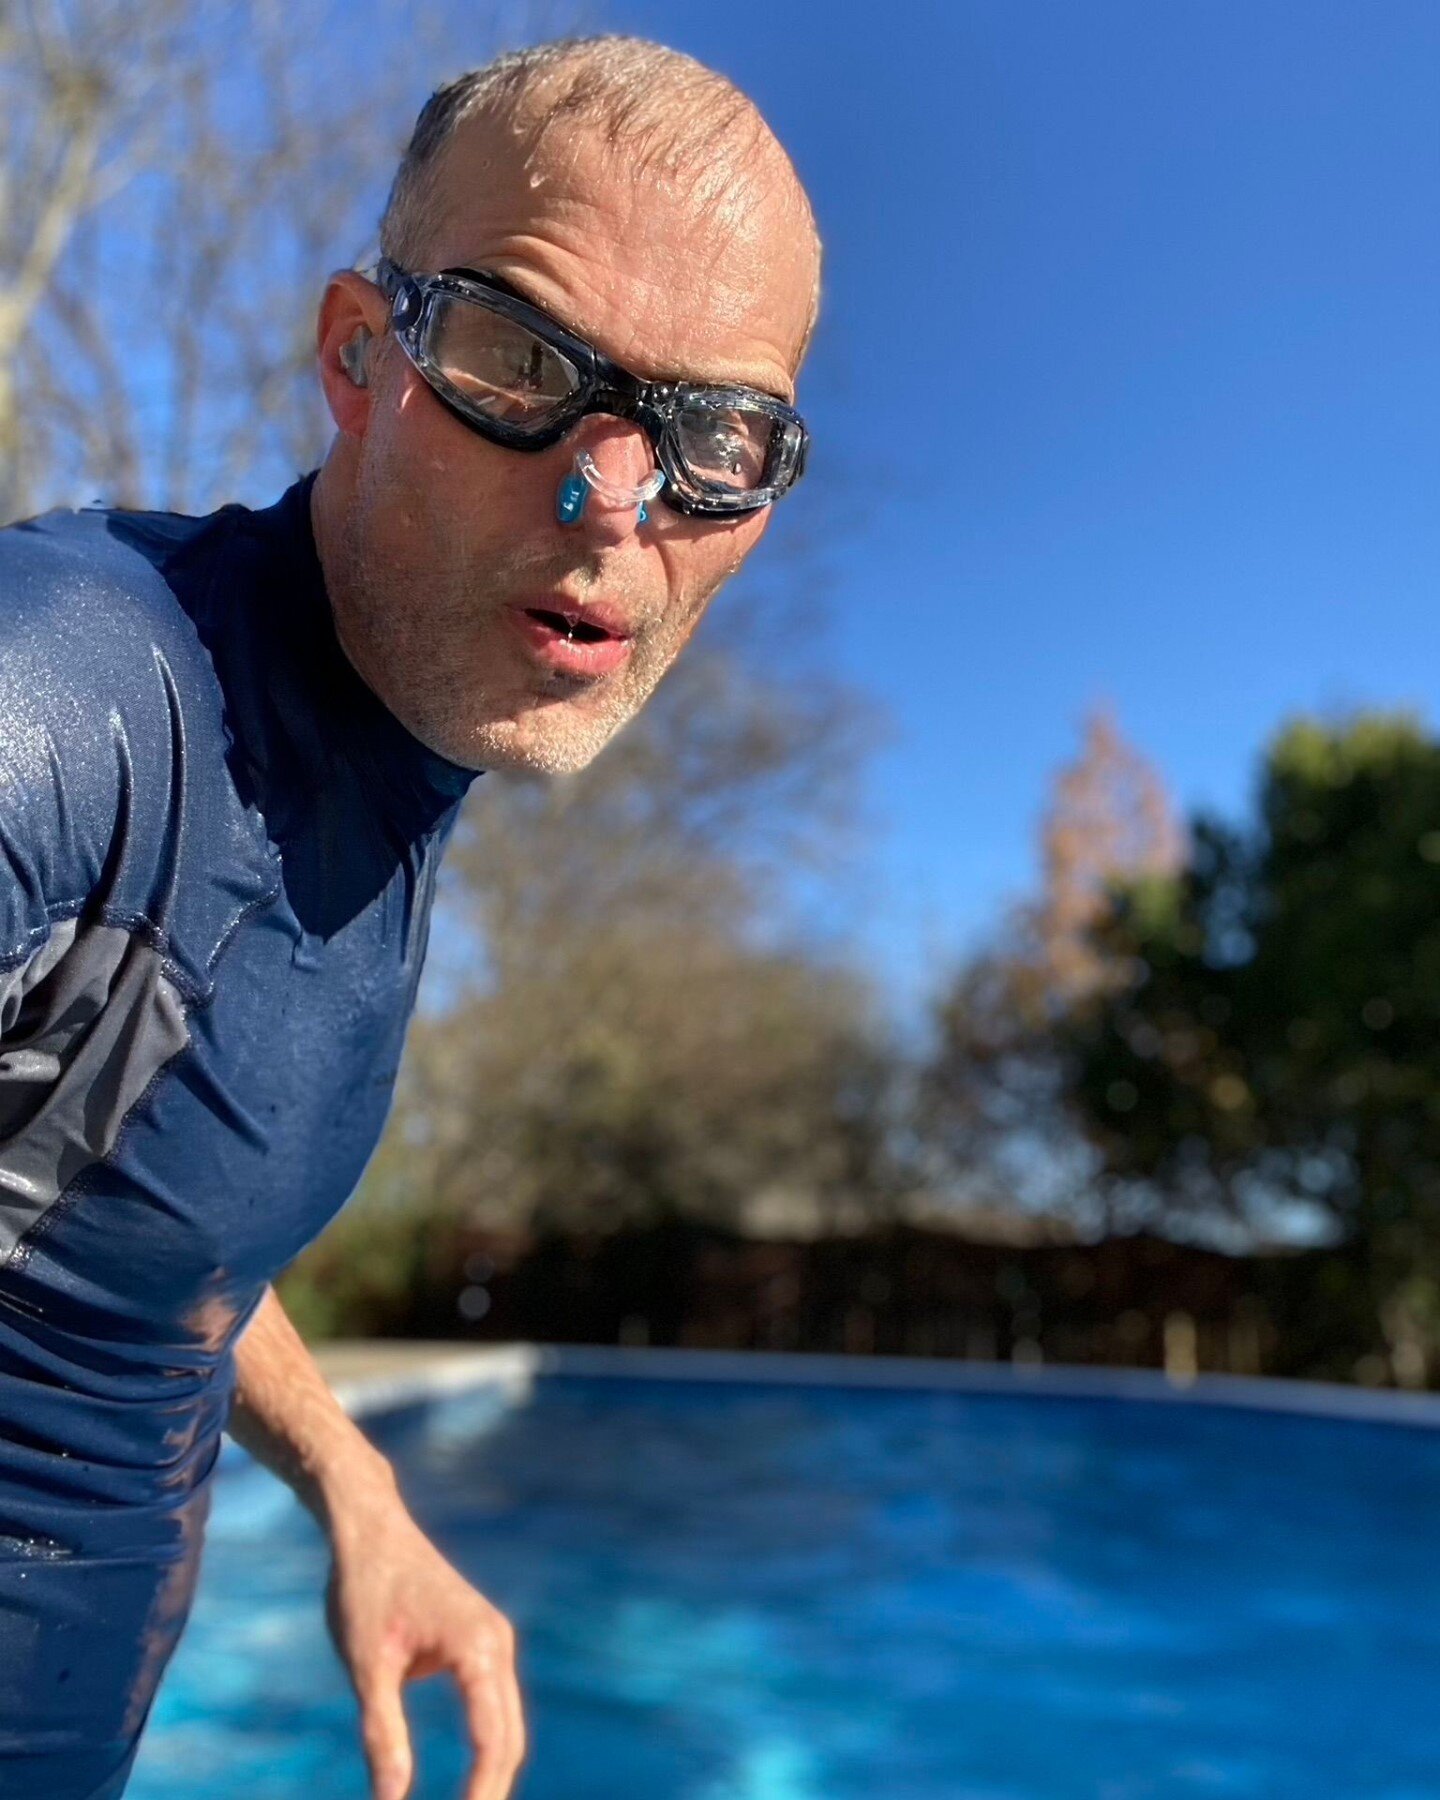 Cold swimming. After my head injury I began to feel a lot of persistent anxiety. And it seemed that almost any type of sensation, sound, or light easily became overwhelming. But one thing that I found that helped me reorient myself and emerge from th